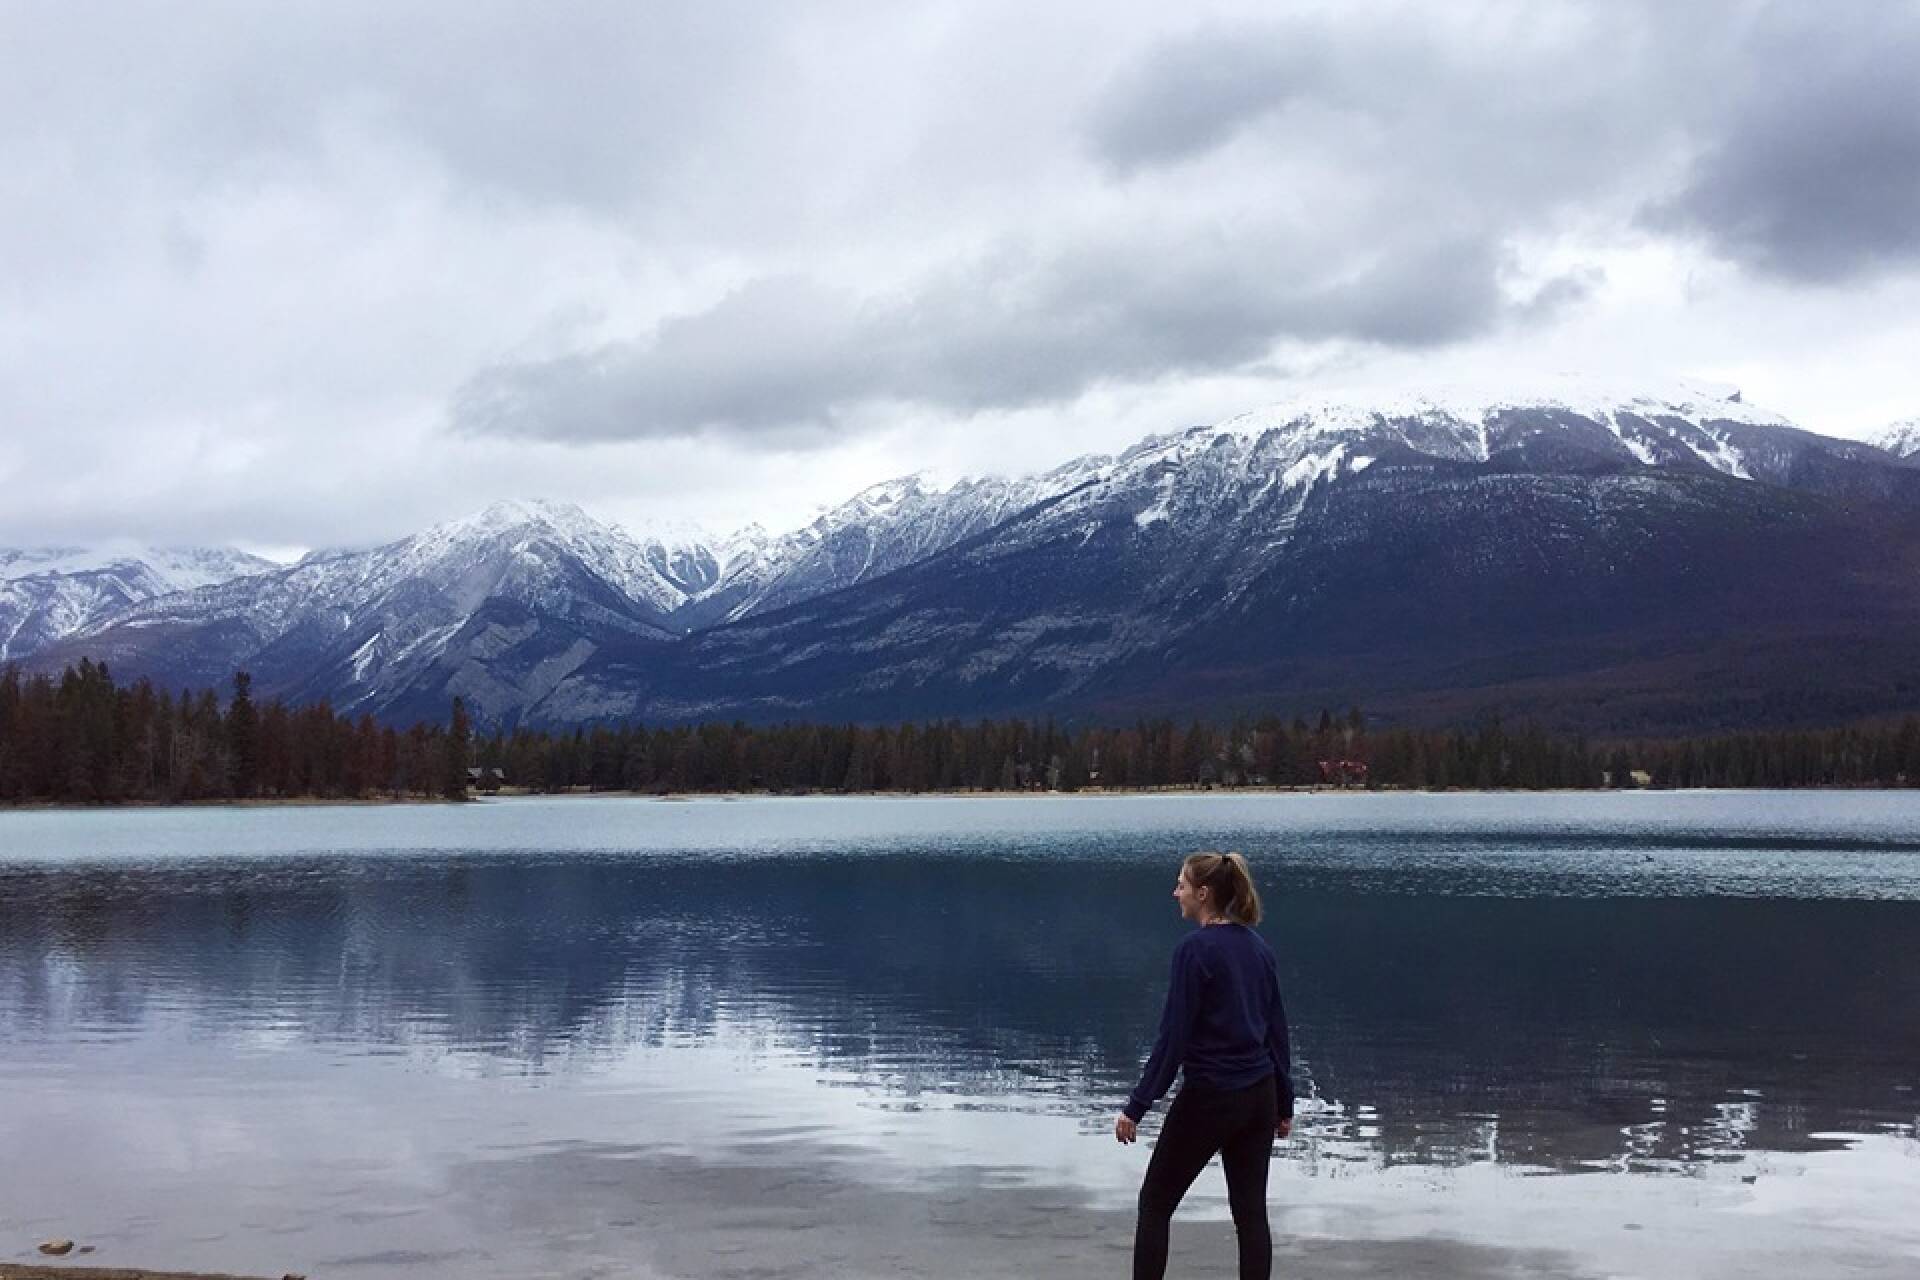 Student Alanah in Canada standing in front of lake and mountains